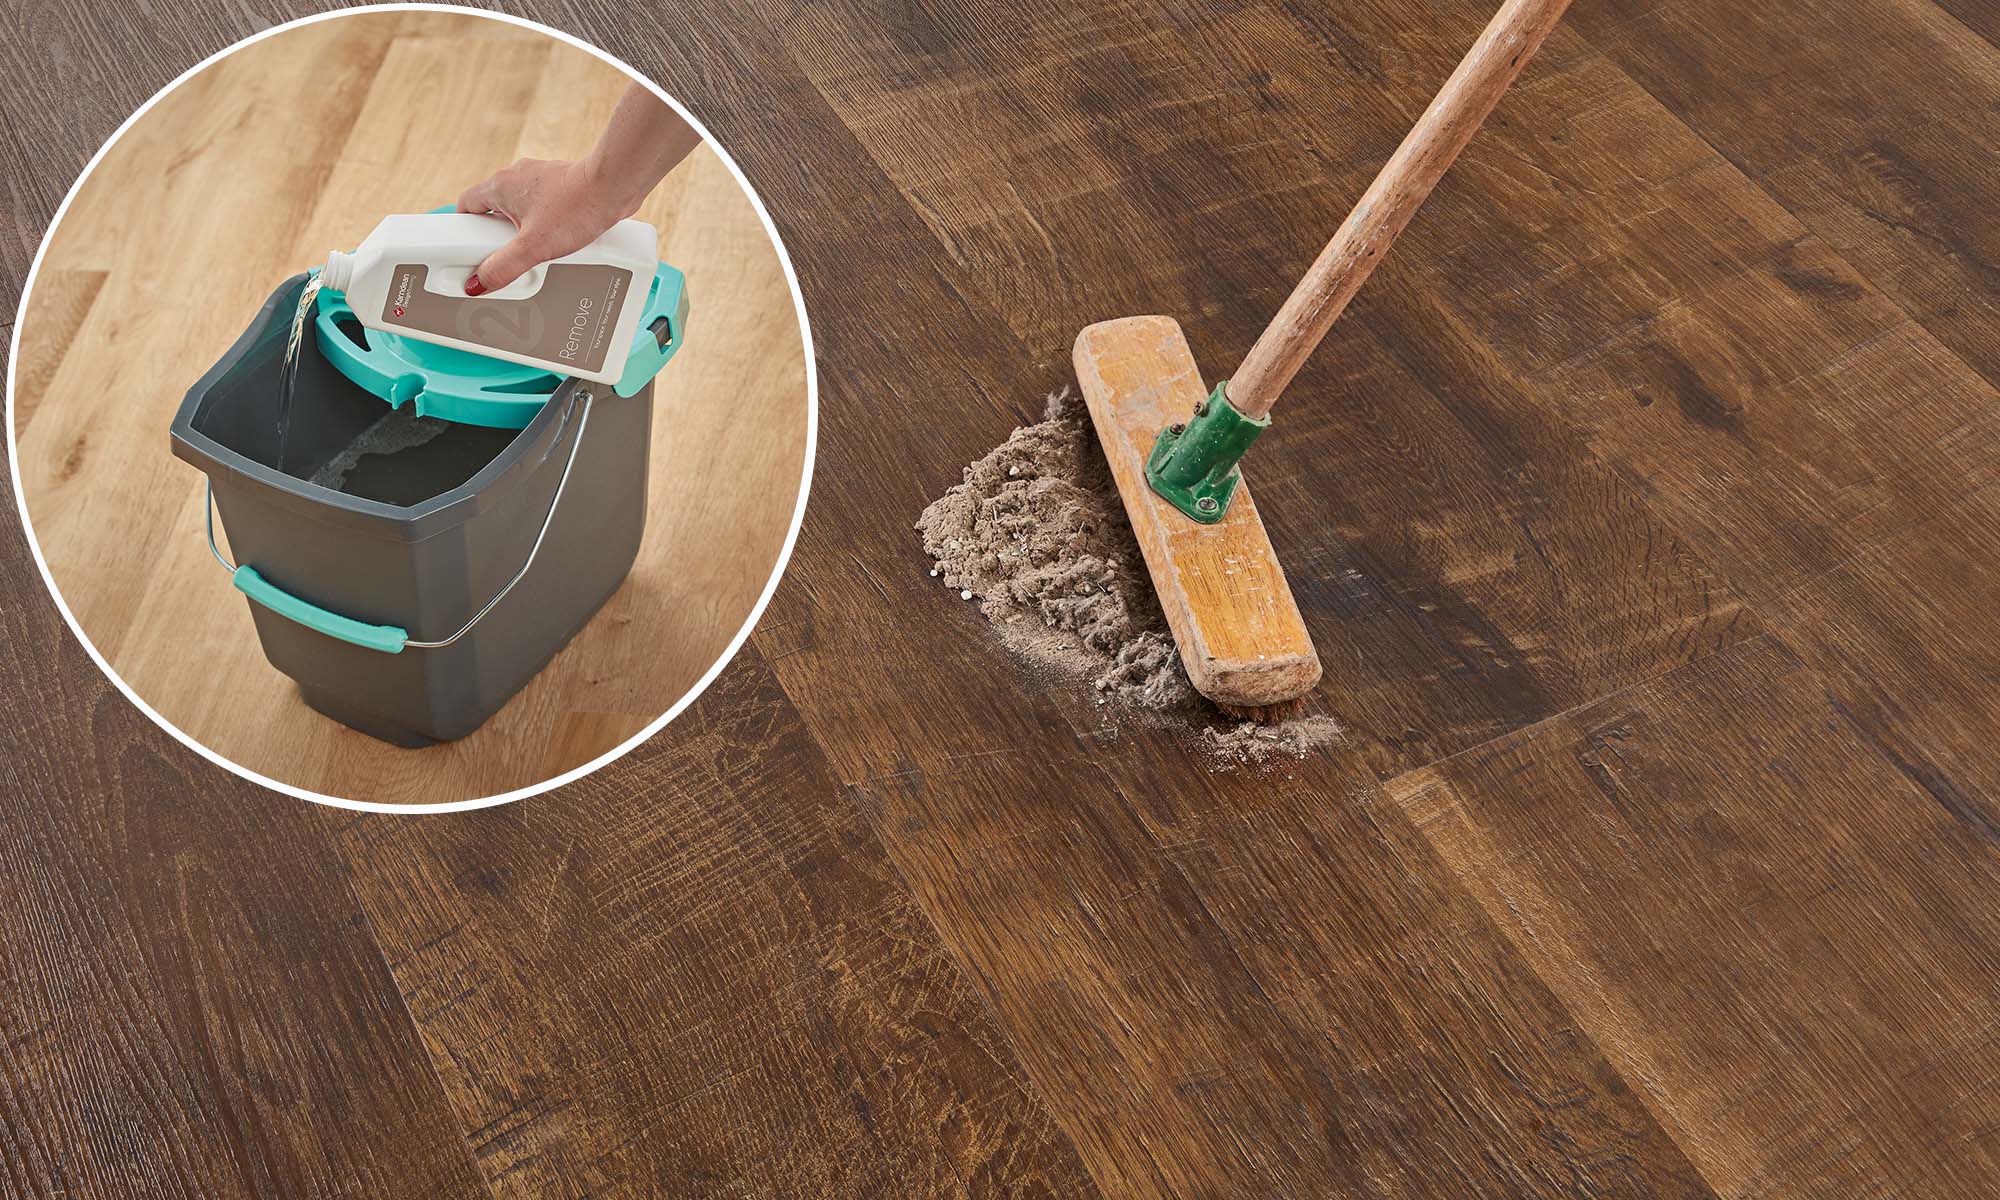 Palio Express cleaning products on wooden floor